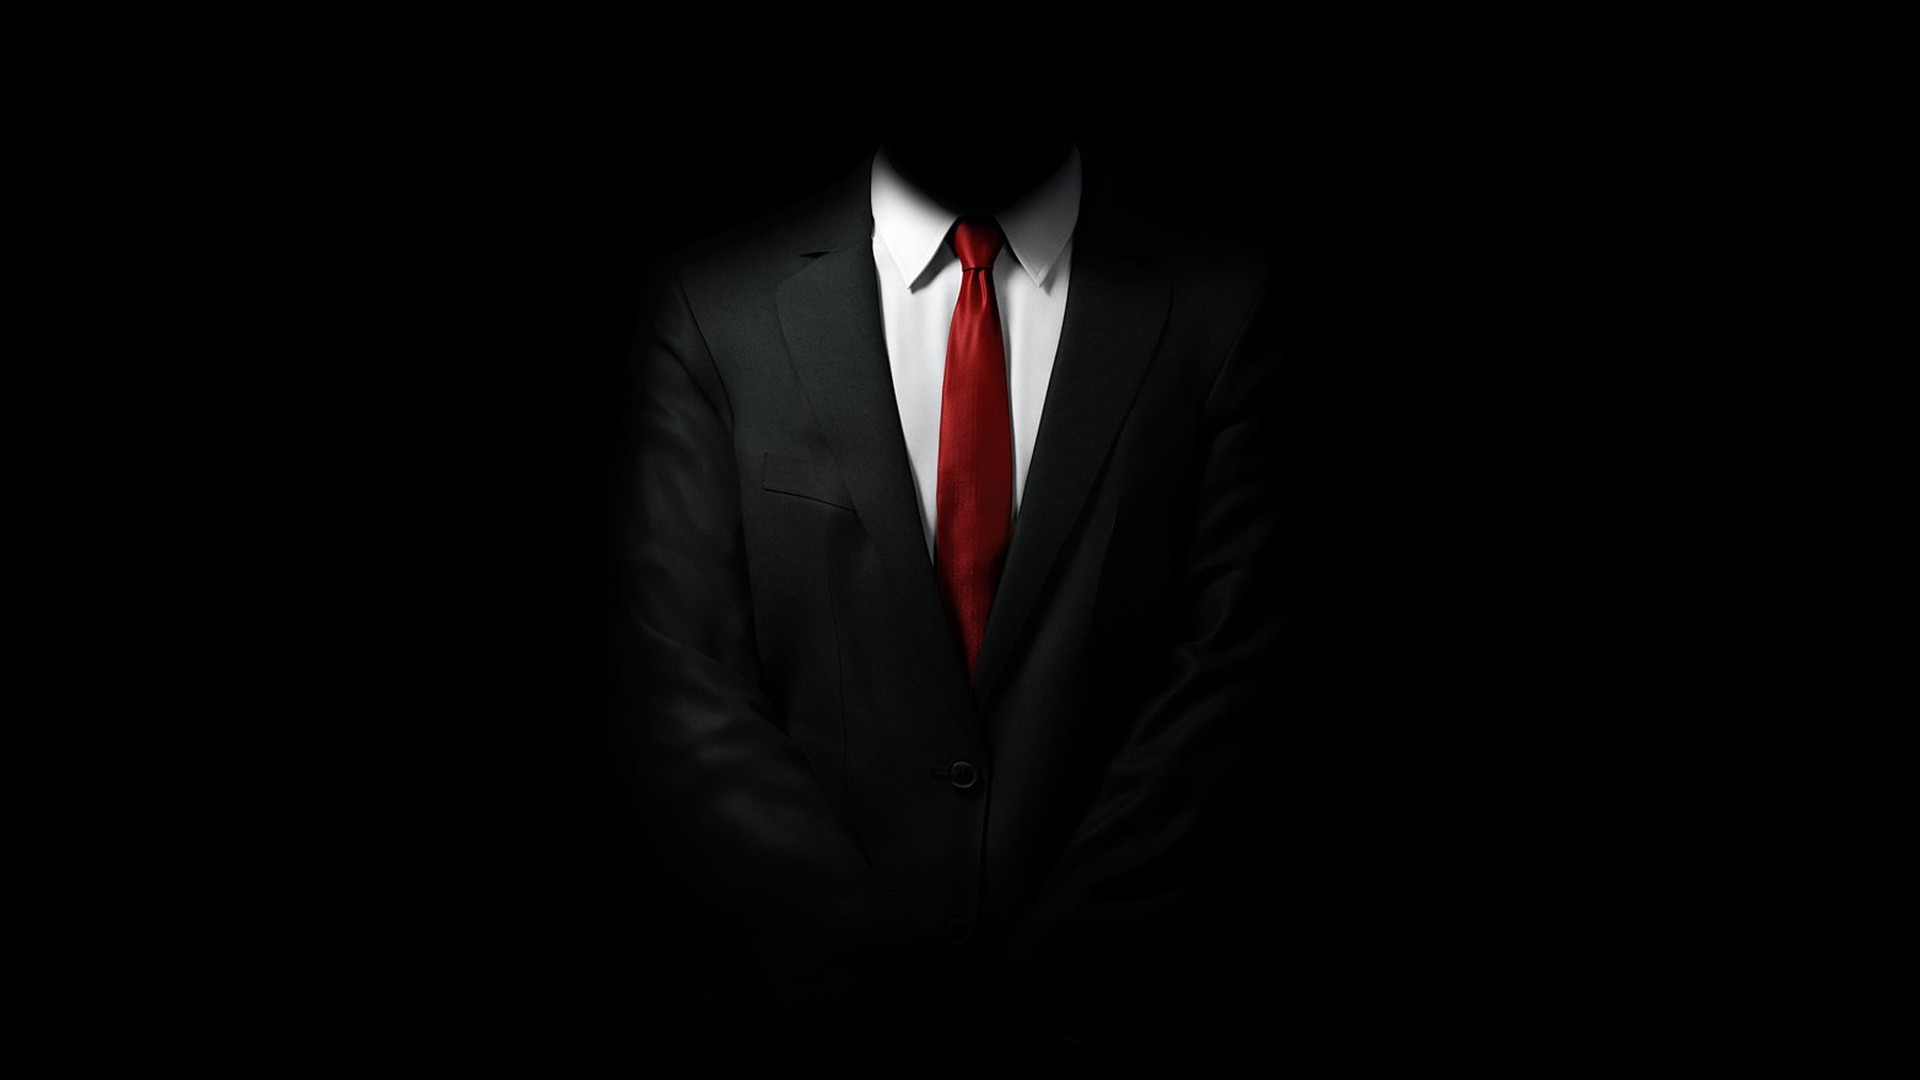 47, Suits, Tie, Black Background, Hitman, Video Games, White Clothing, Red Tie, Hitman: Absolution Wallpaper